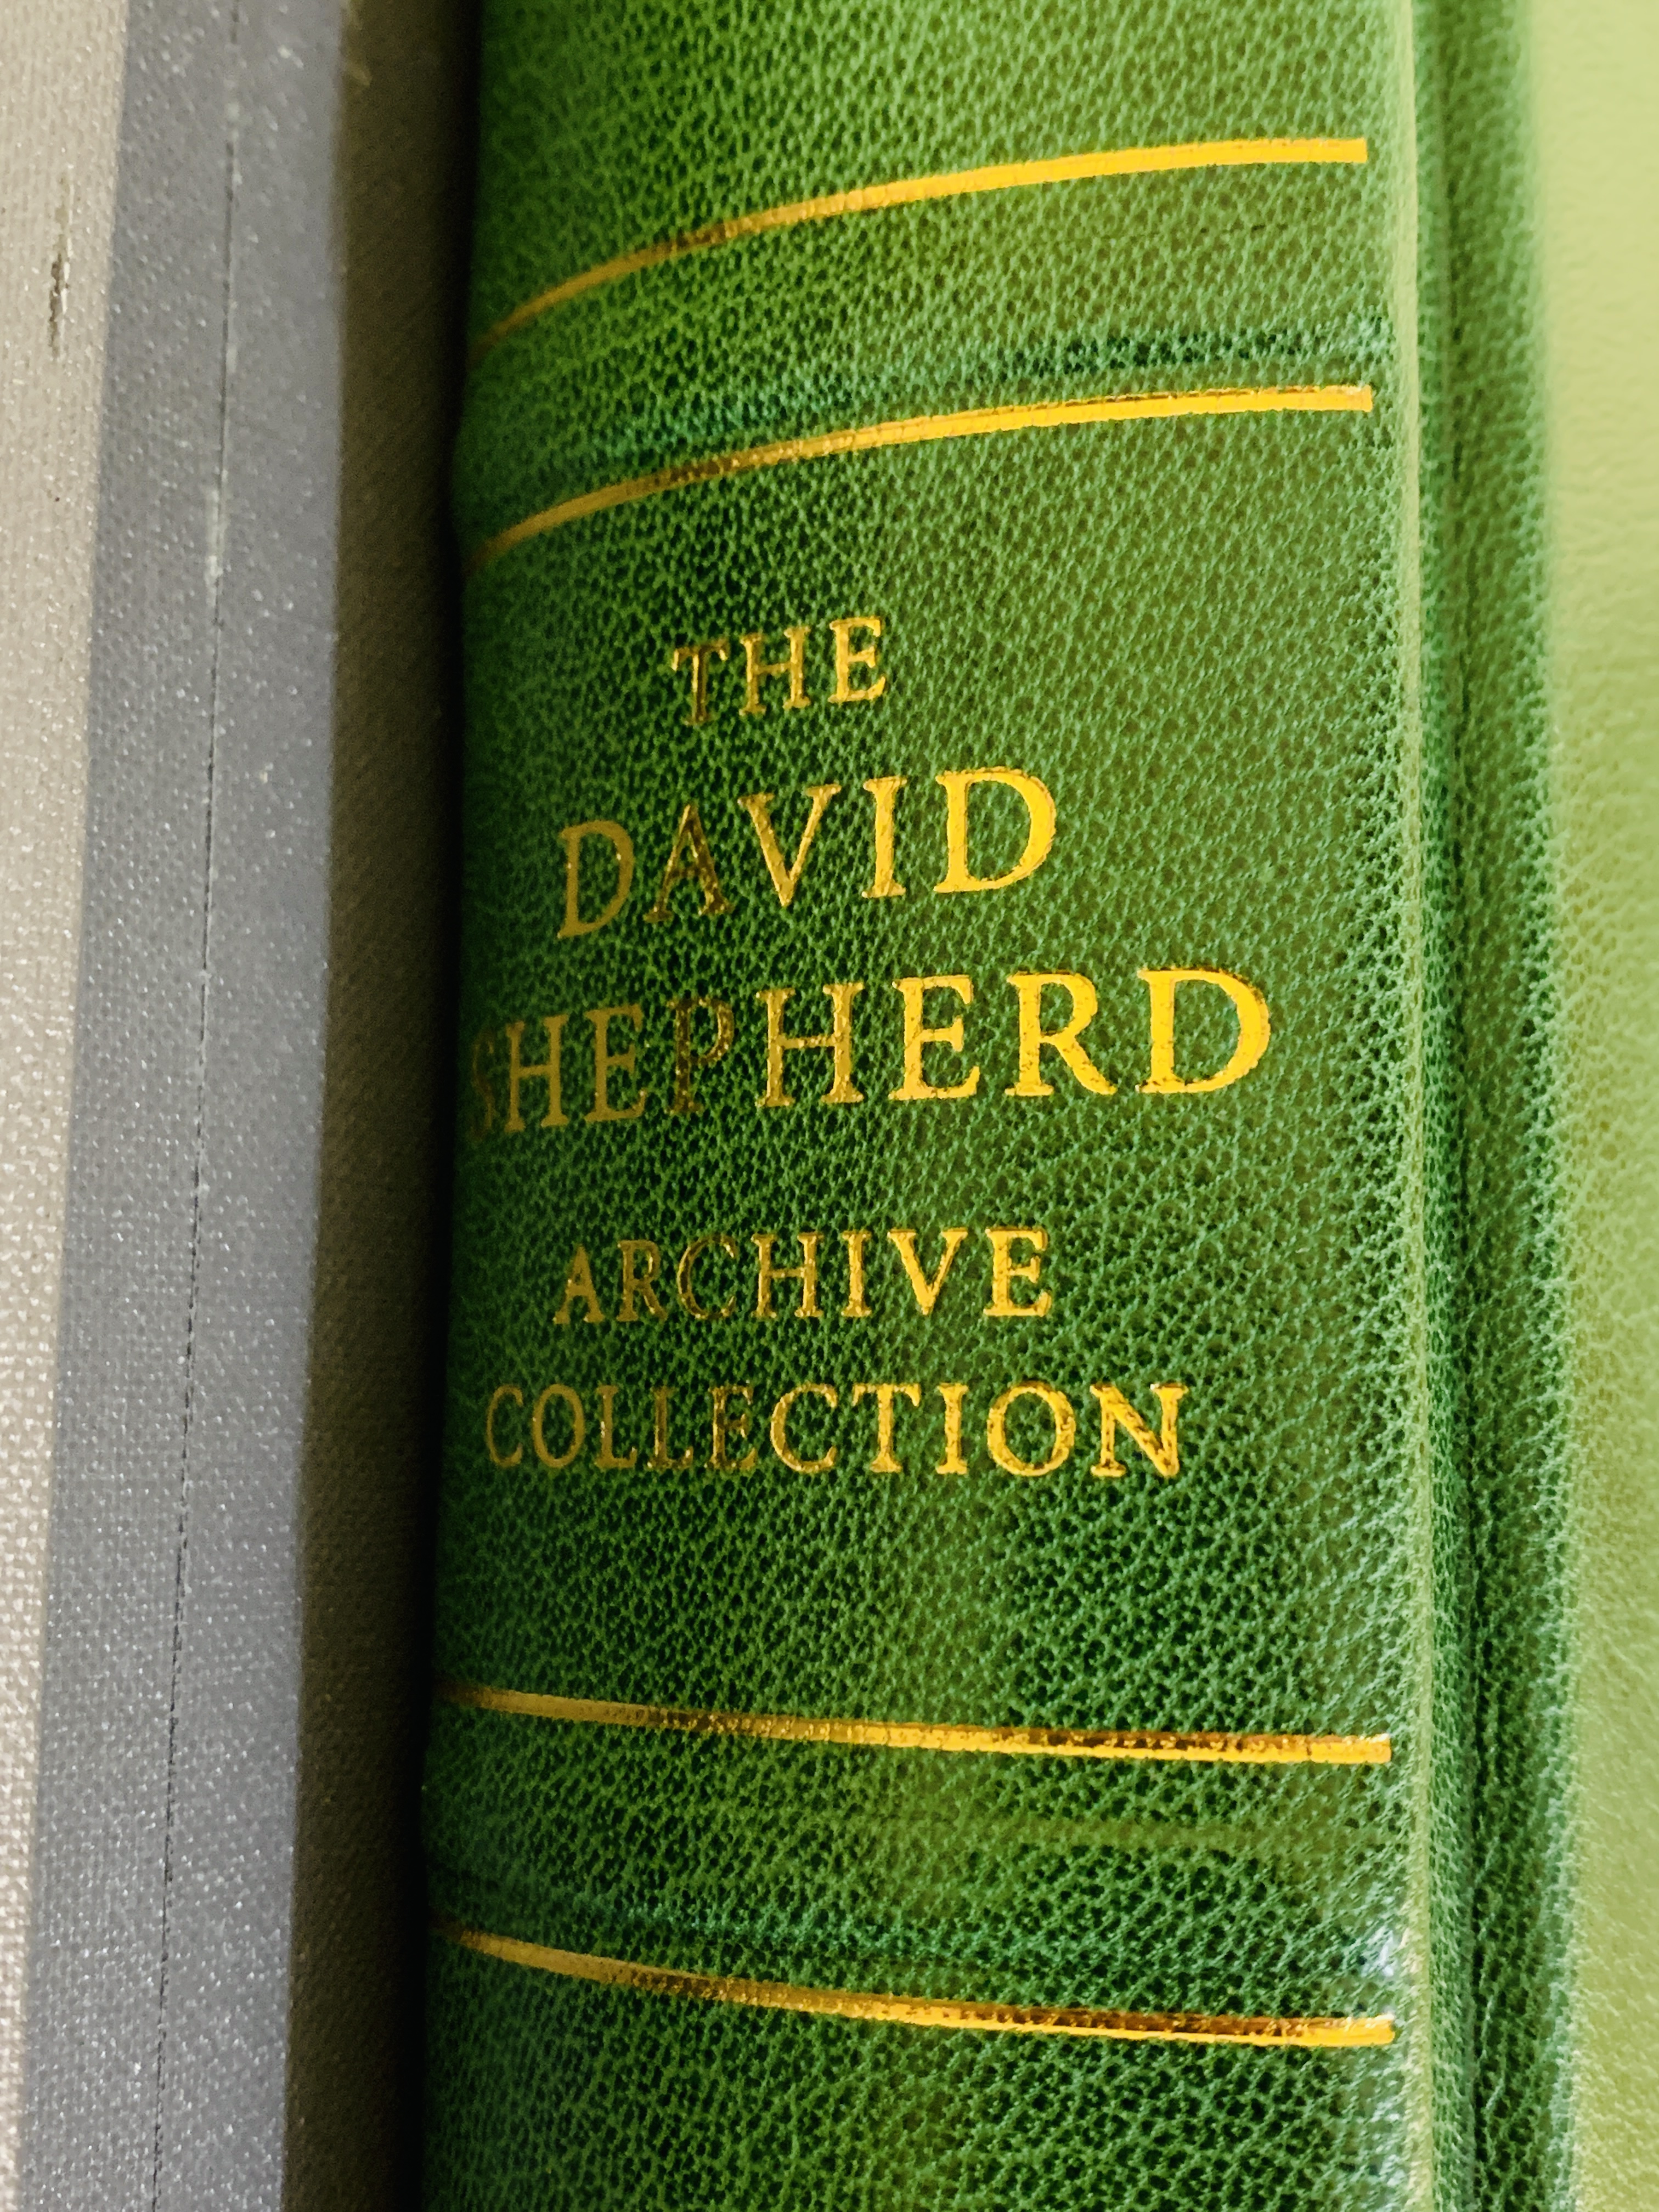 The David Shepherd Archive Collection - Image 2 of 14